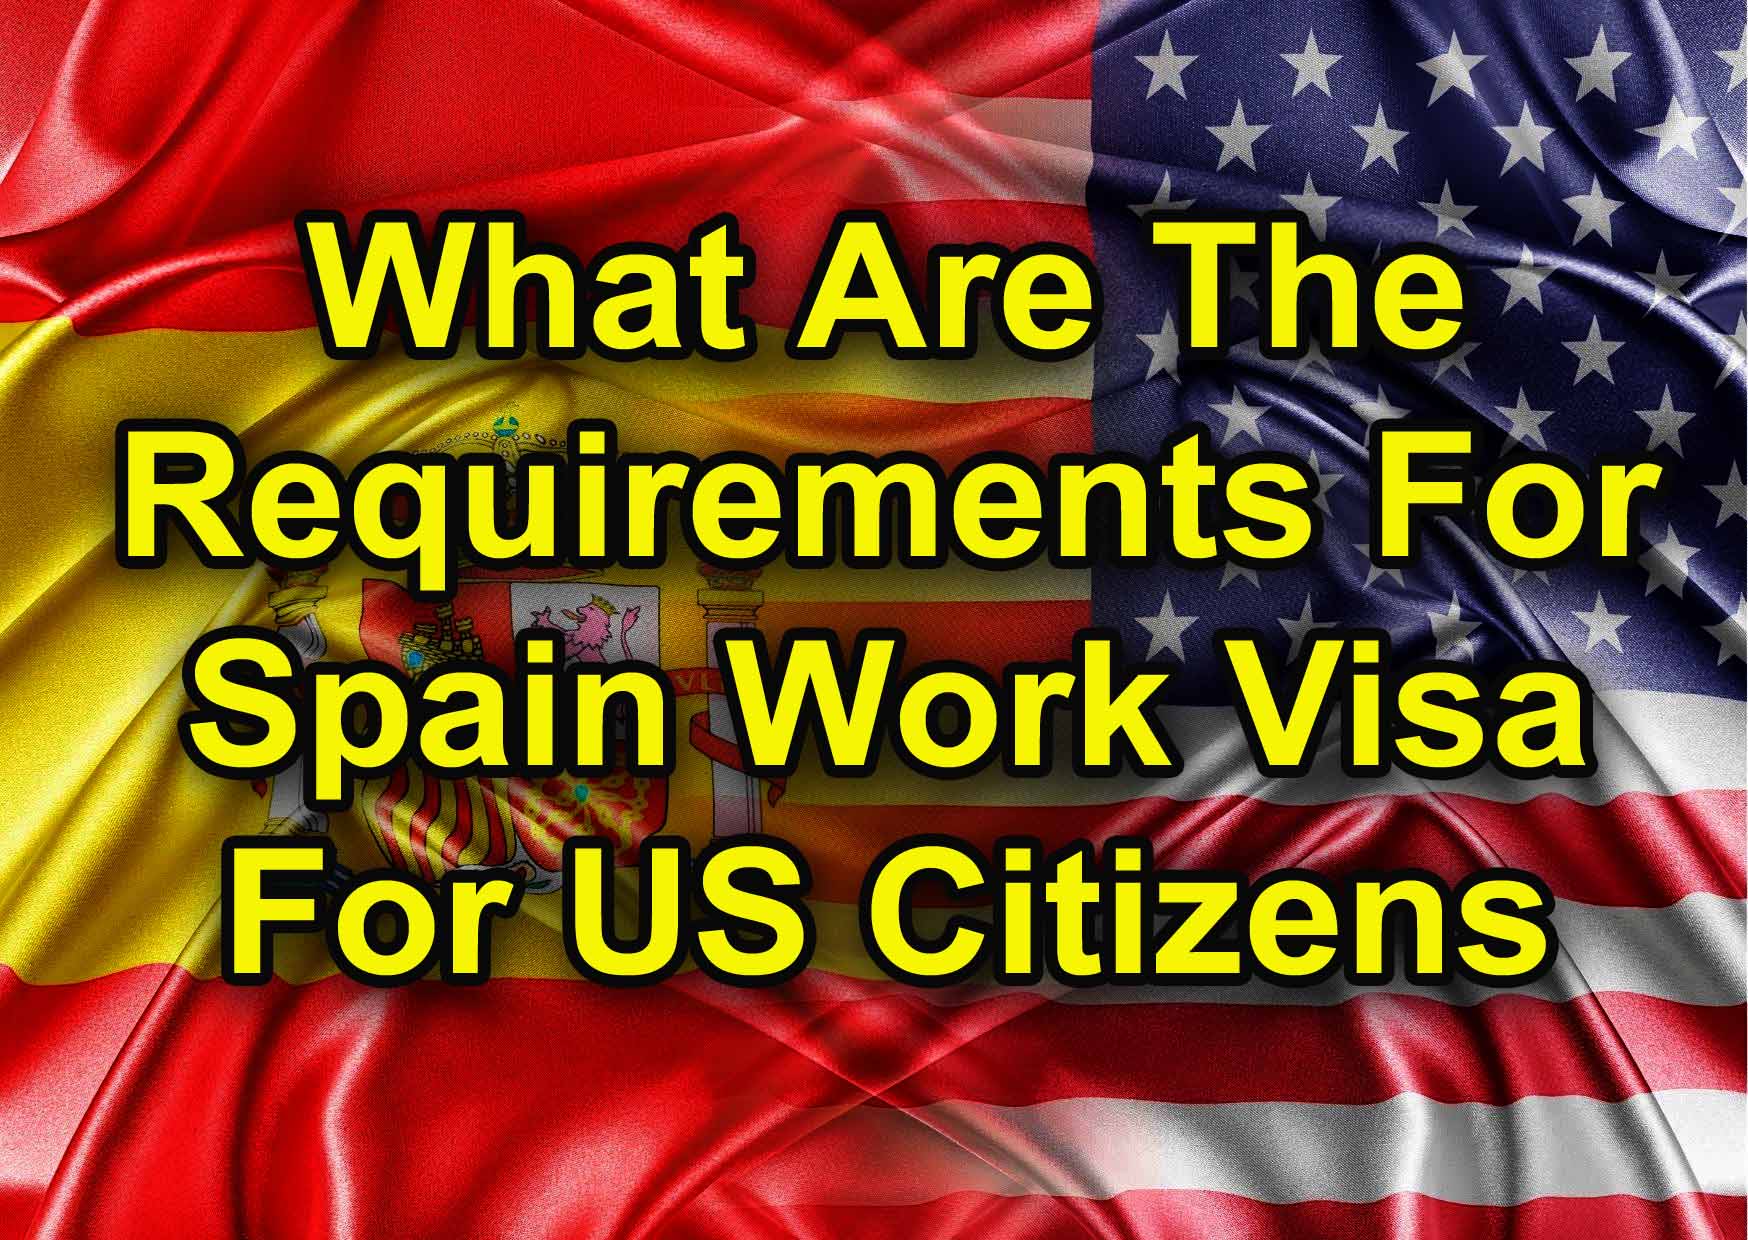 Requirements For Spain Work Visa For US Citizens